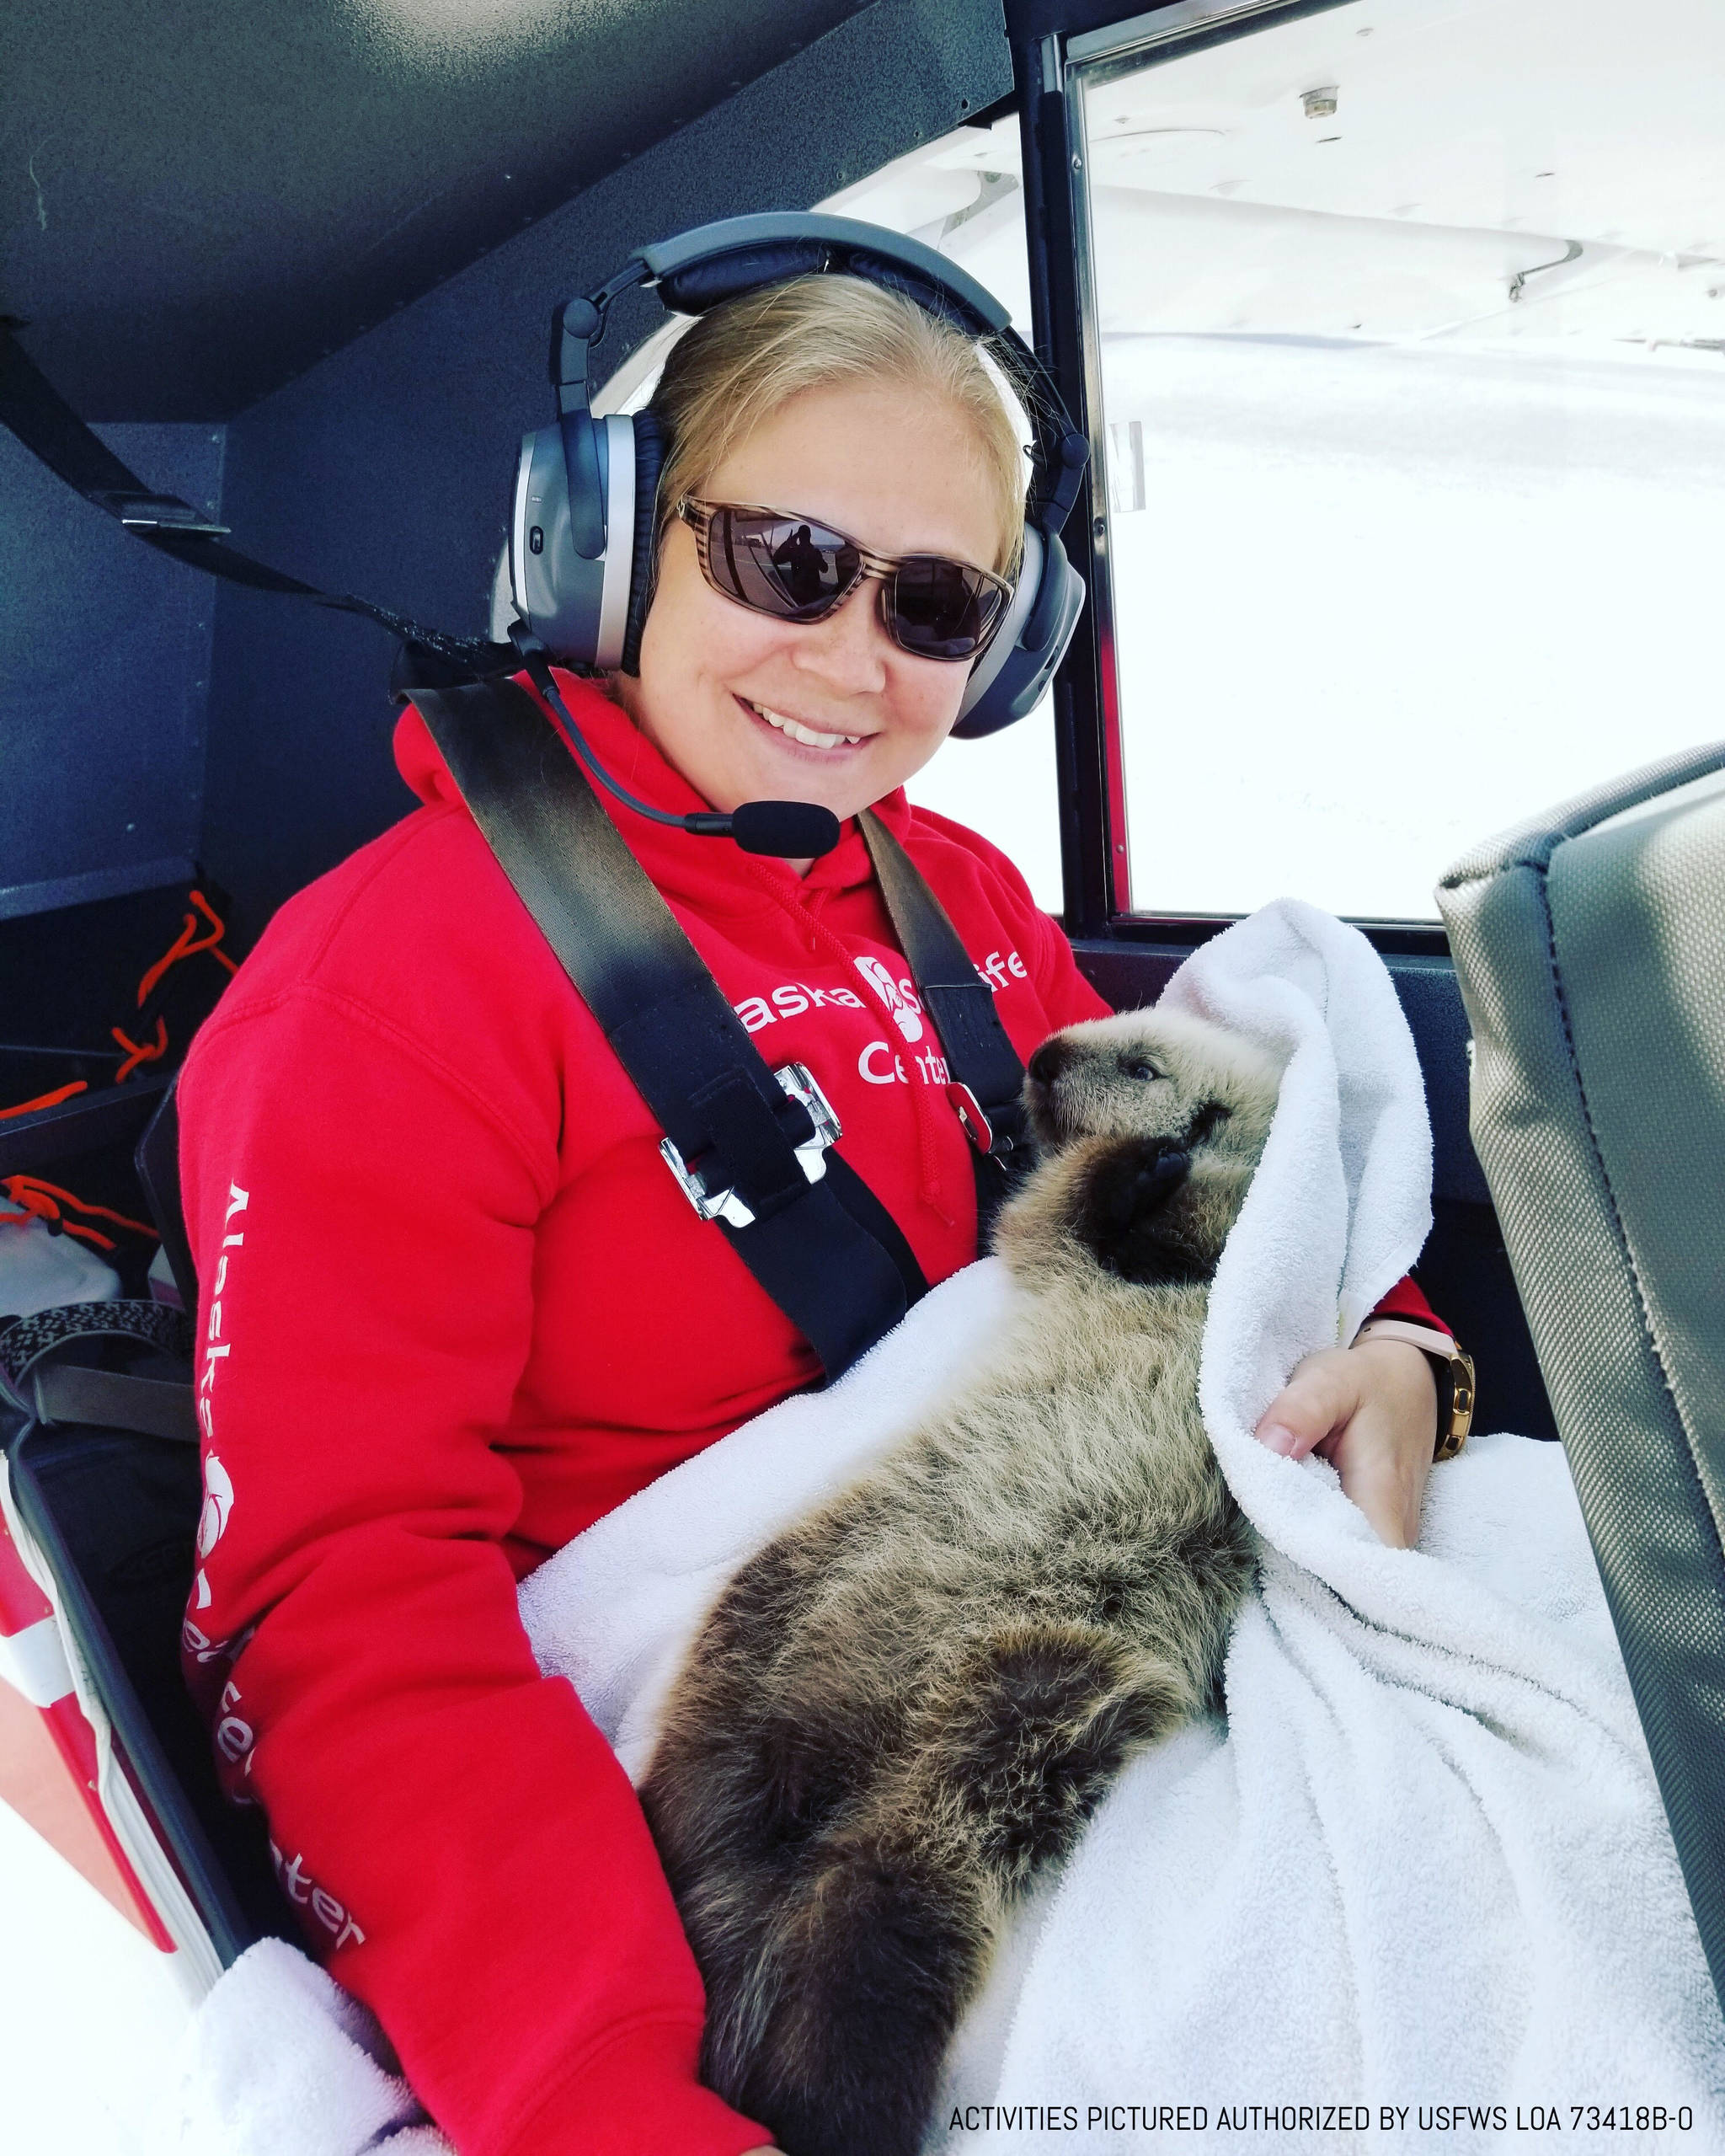 A sea otter pup was rescued from Homer and brought to Seward, Monday, Aug. 26, 2019, at the Alaska SeaLife Center in Seward Alaska. (Photo courtesy of Alaska SeaLife Center)